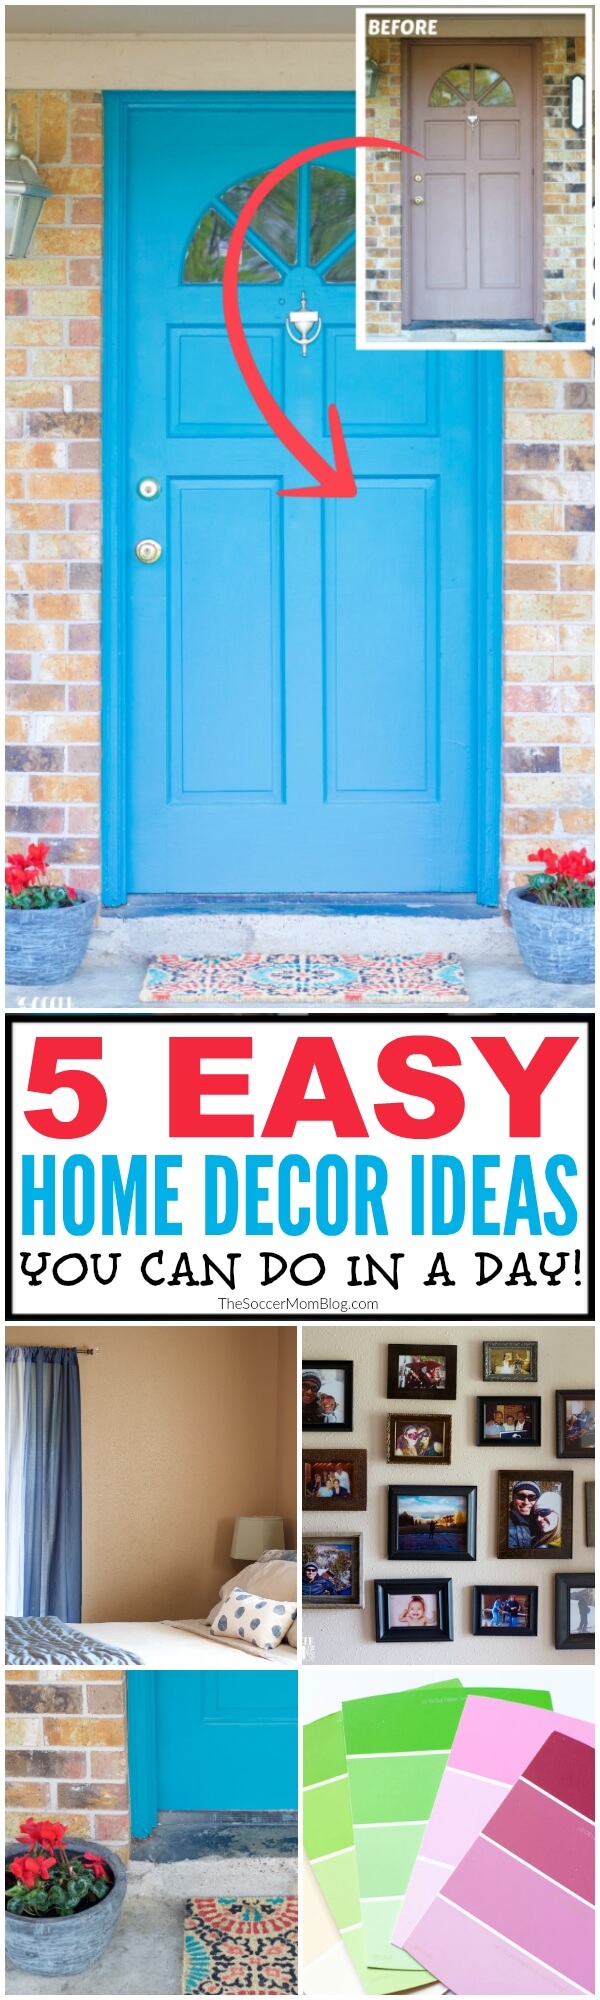 Even if you live in a rental home or apartment, you can still make it beautiful! 5 fast & easy home decor ideas you can DIY...even on a tight budget!